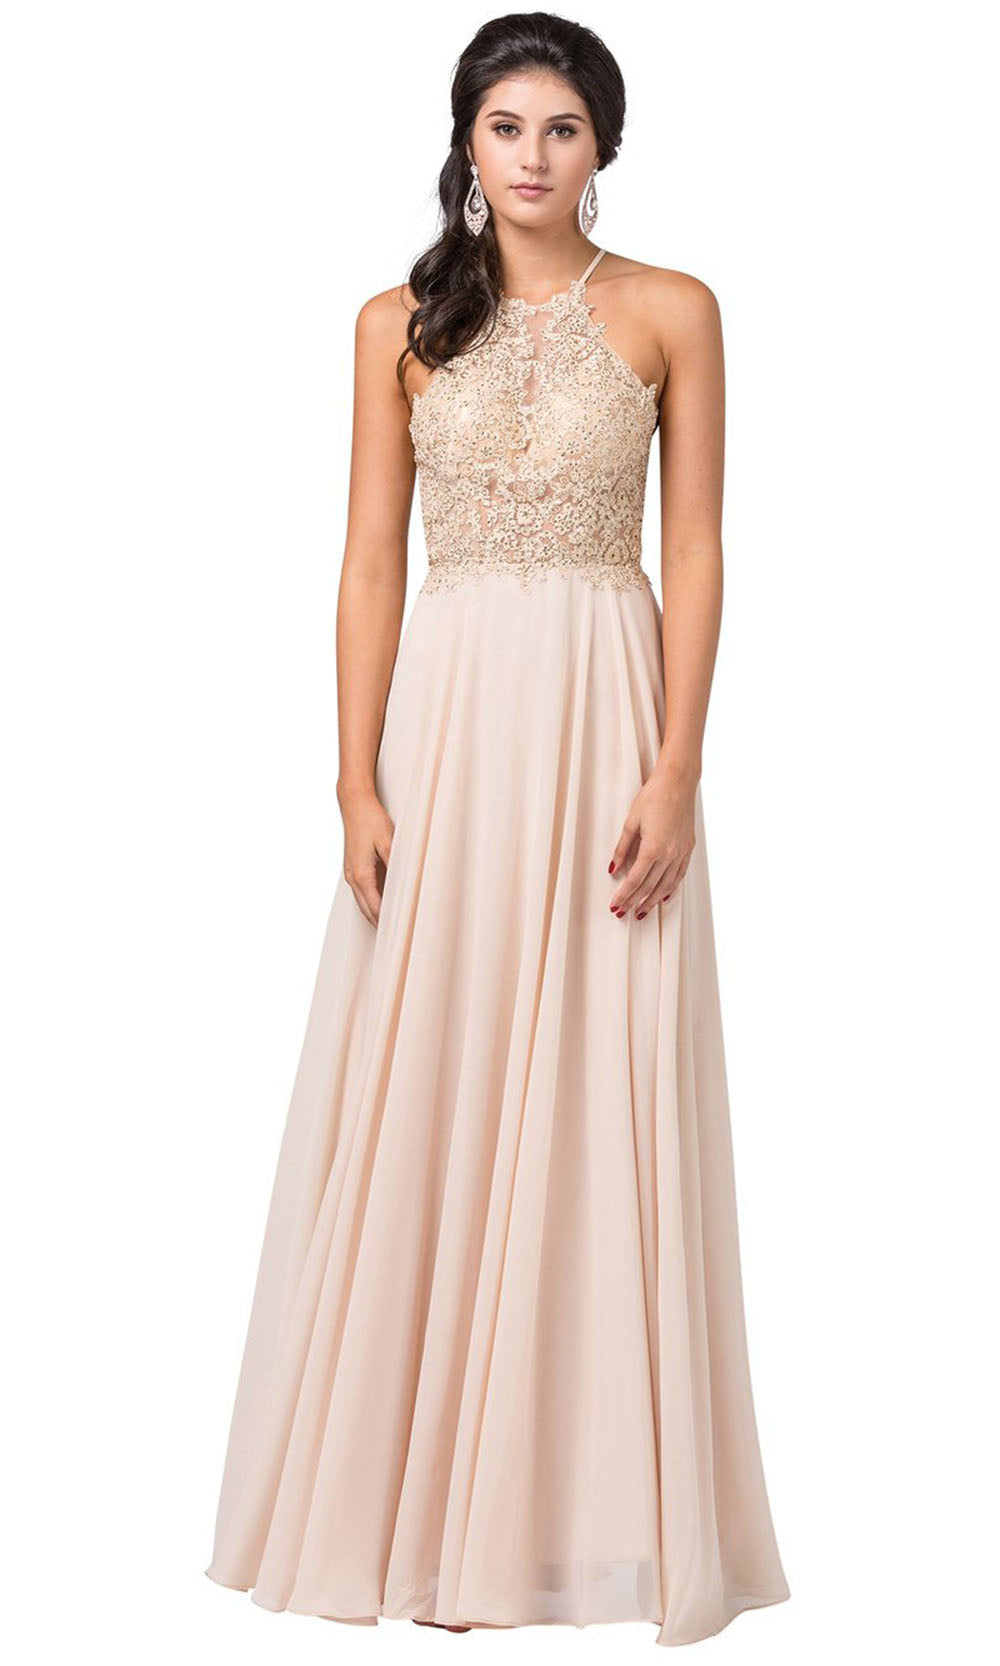 Dancing Queen - 2716 Embroidered Halter A-Line Dress In Champagne & Gold